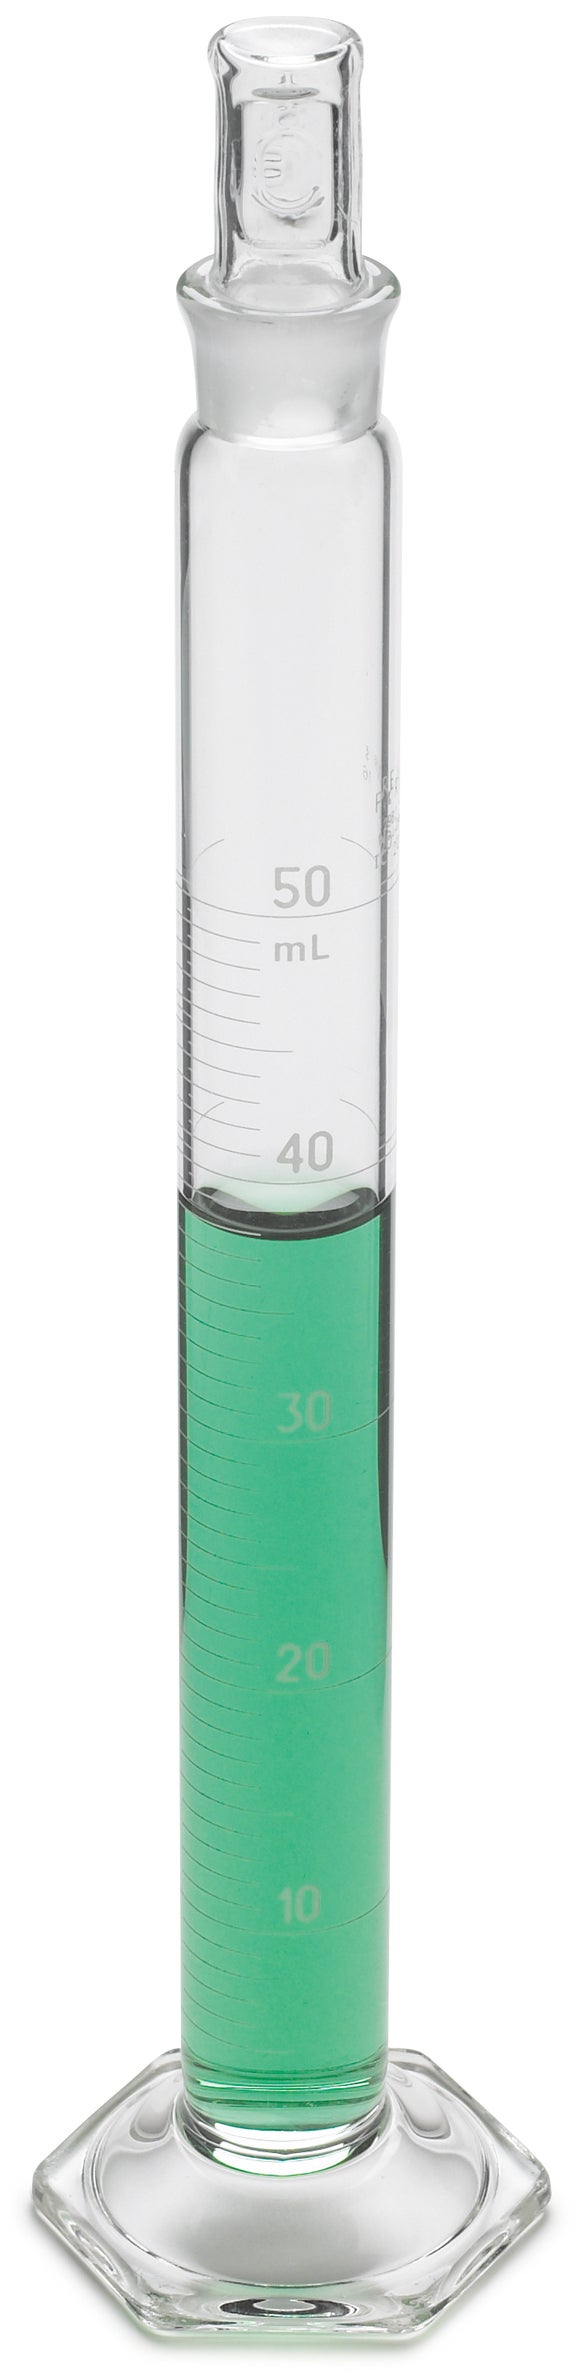 Cylinder, graduated, mixing, Glass, 50 mL +-0.4 mL, 1.0 mL divisions, glass stopper #16